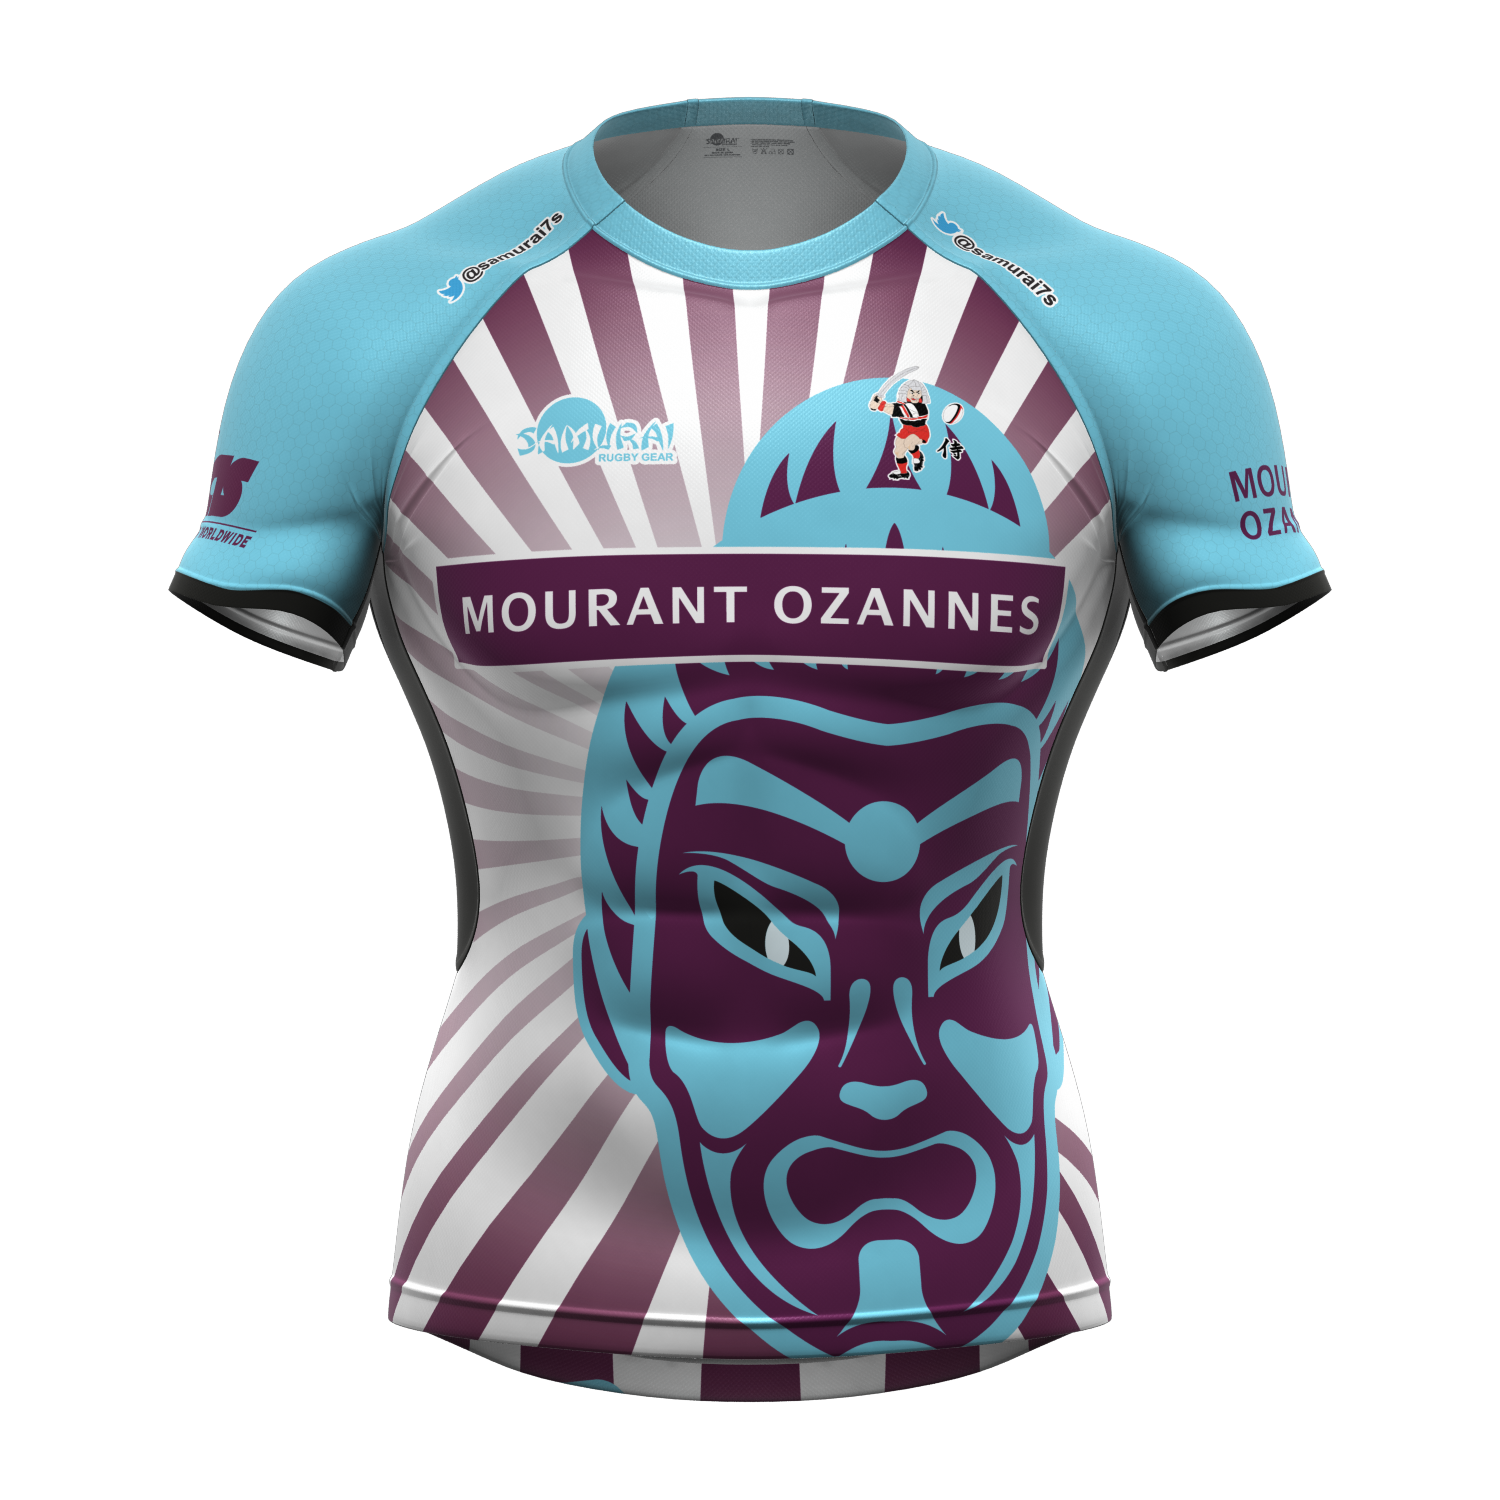 Mourant Ozannes Samurai Team Strides Back with an Impressive Line Up for the GFI HKFC 10s